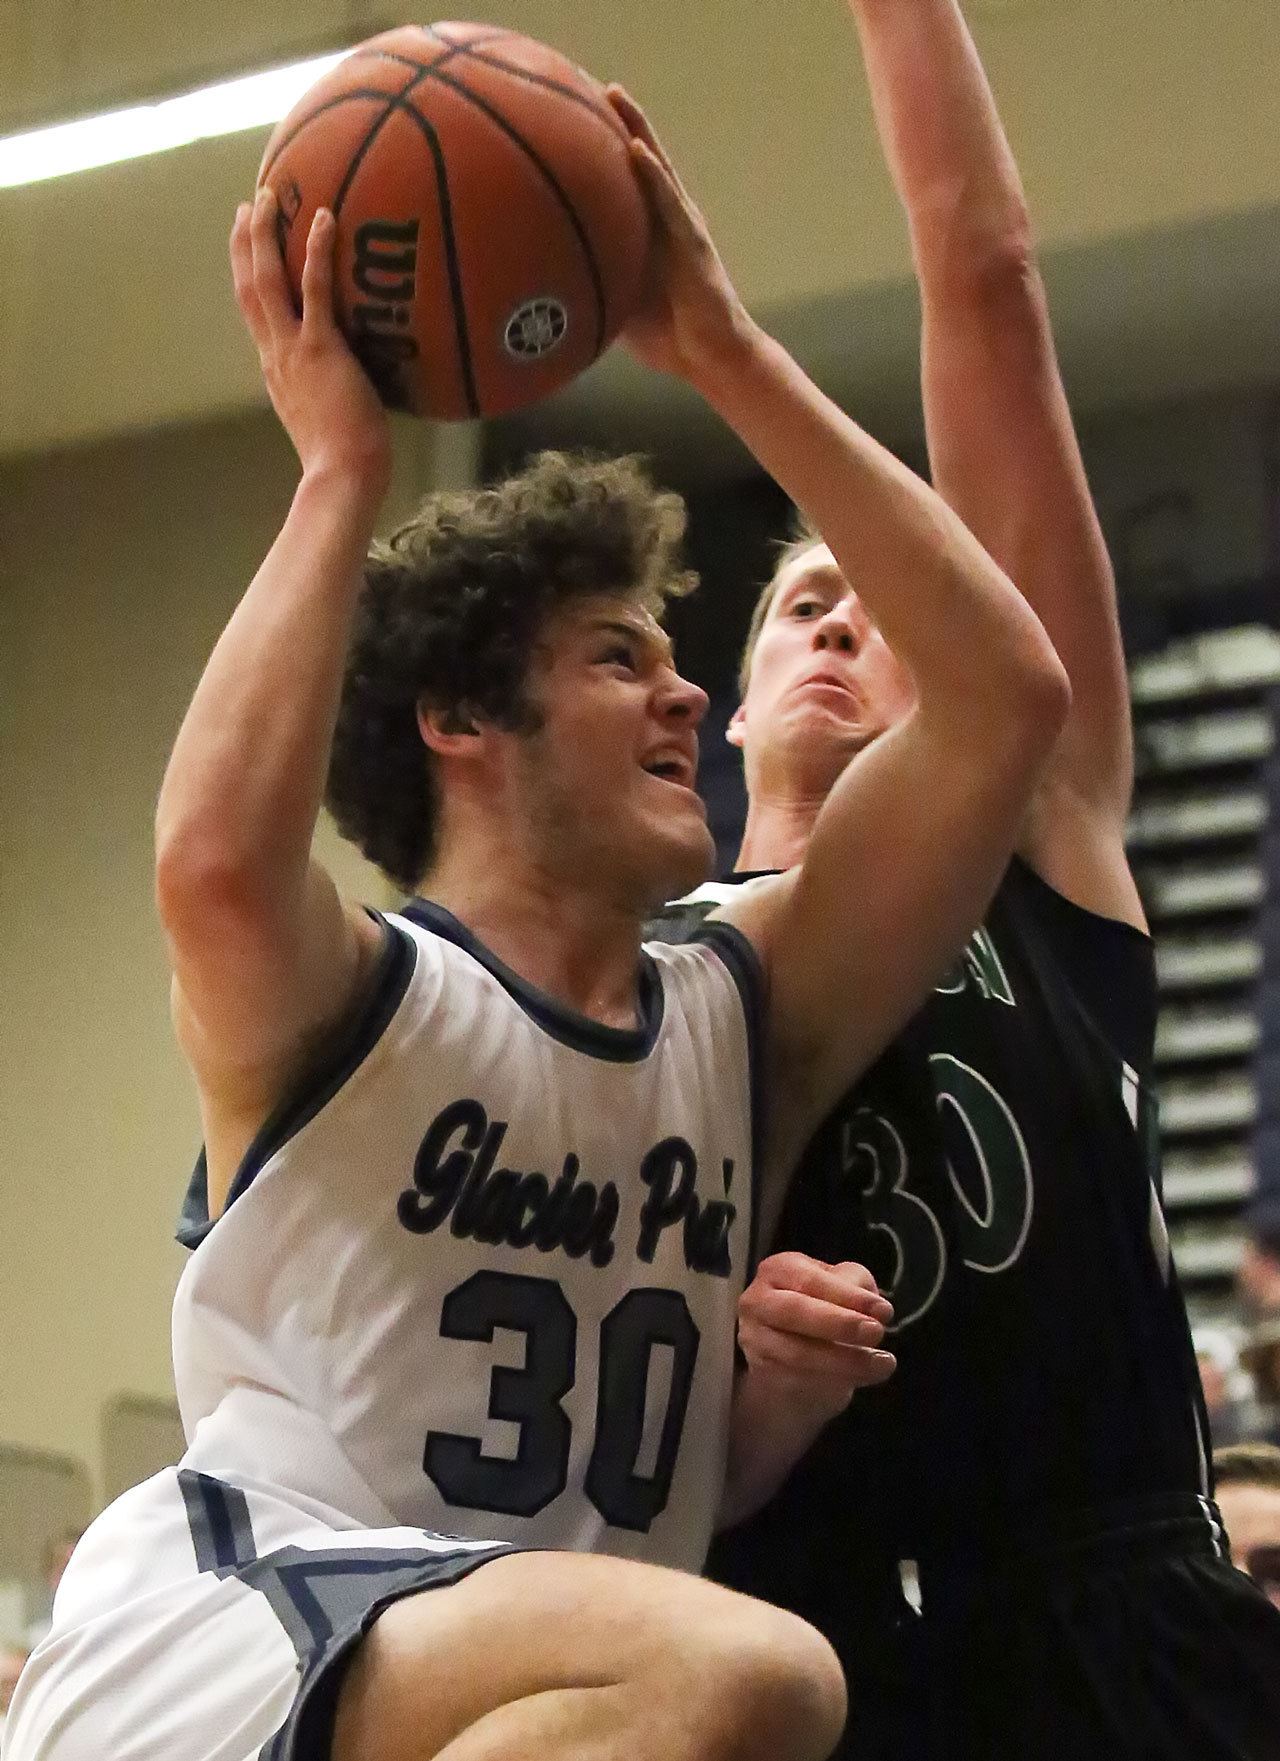 Glacier Peak’s Bobby Martin (left) attempts a shot with Jackson’s Hunter Johnson defending during a game Friday at Glacier Peak High School in Snohomish. The Grizzles defeated the Timberwolves 64-41. (Kevin Clark / The Herald)